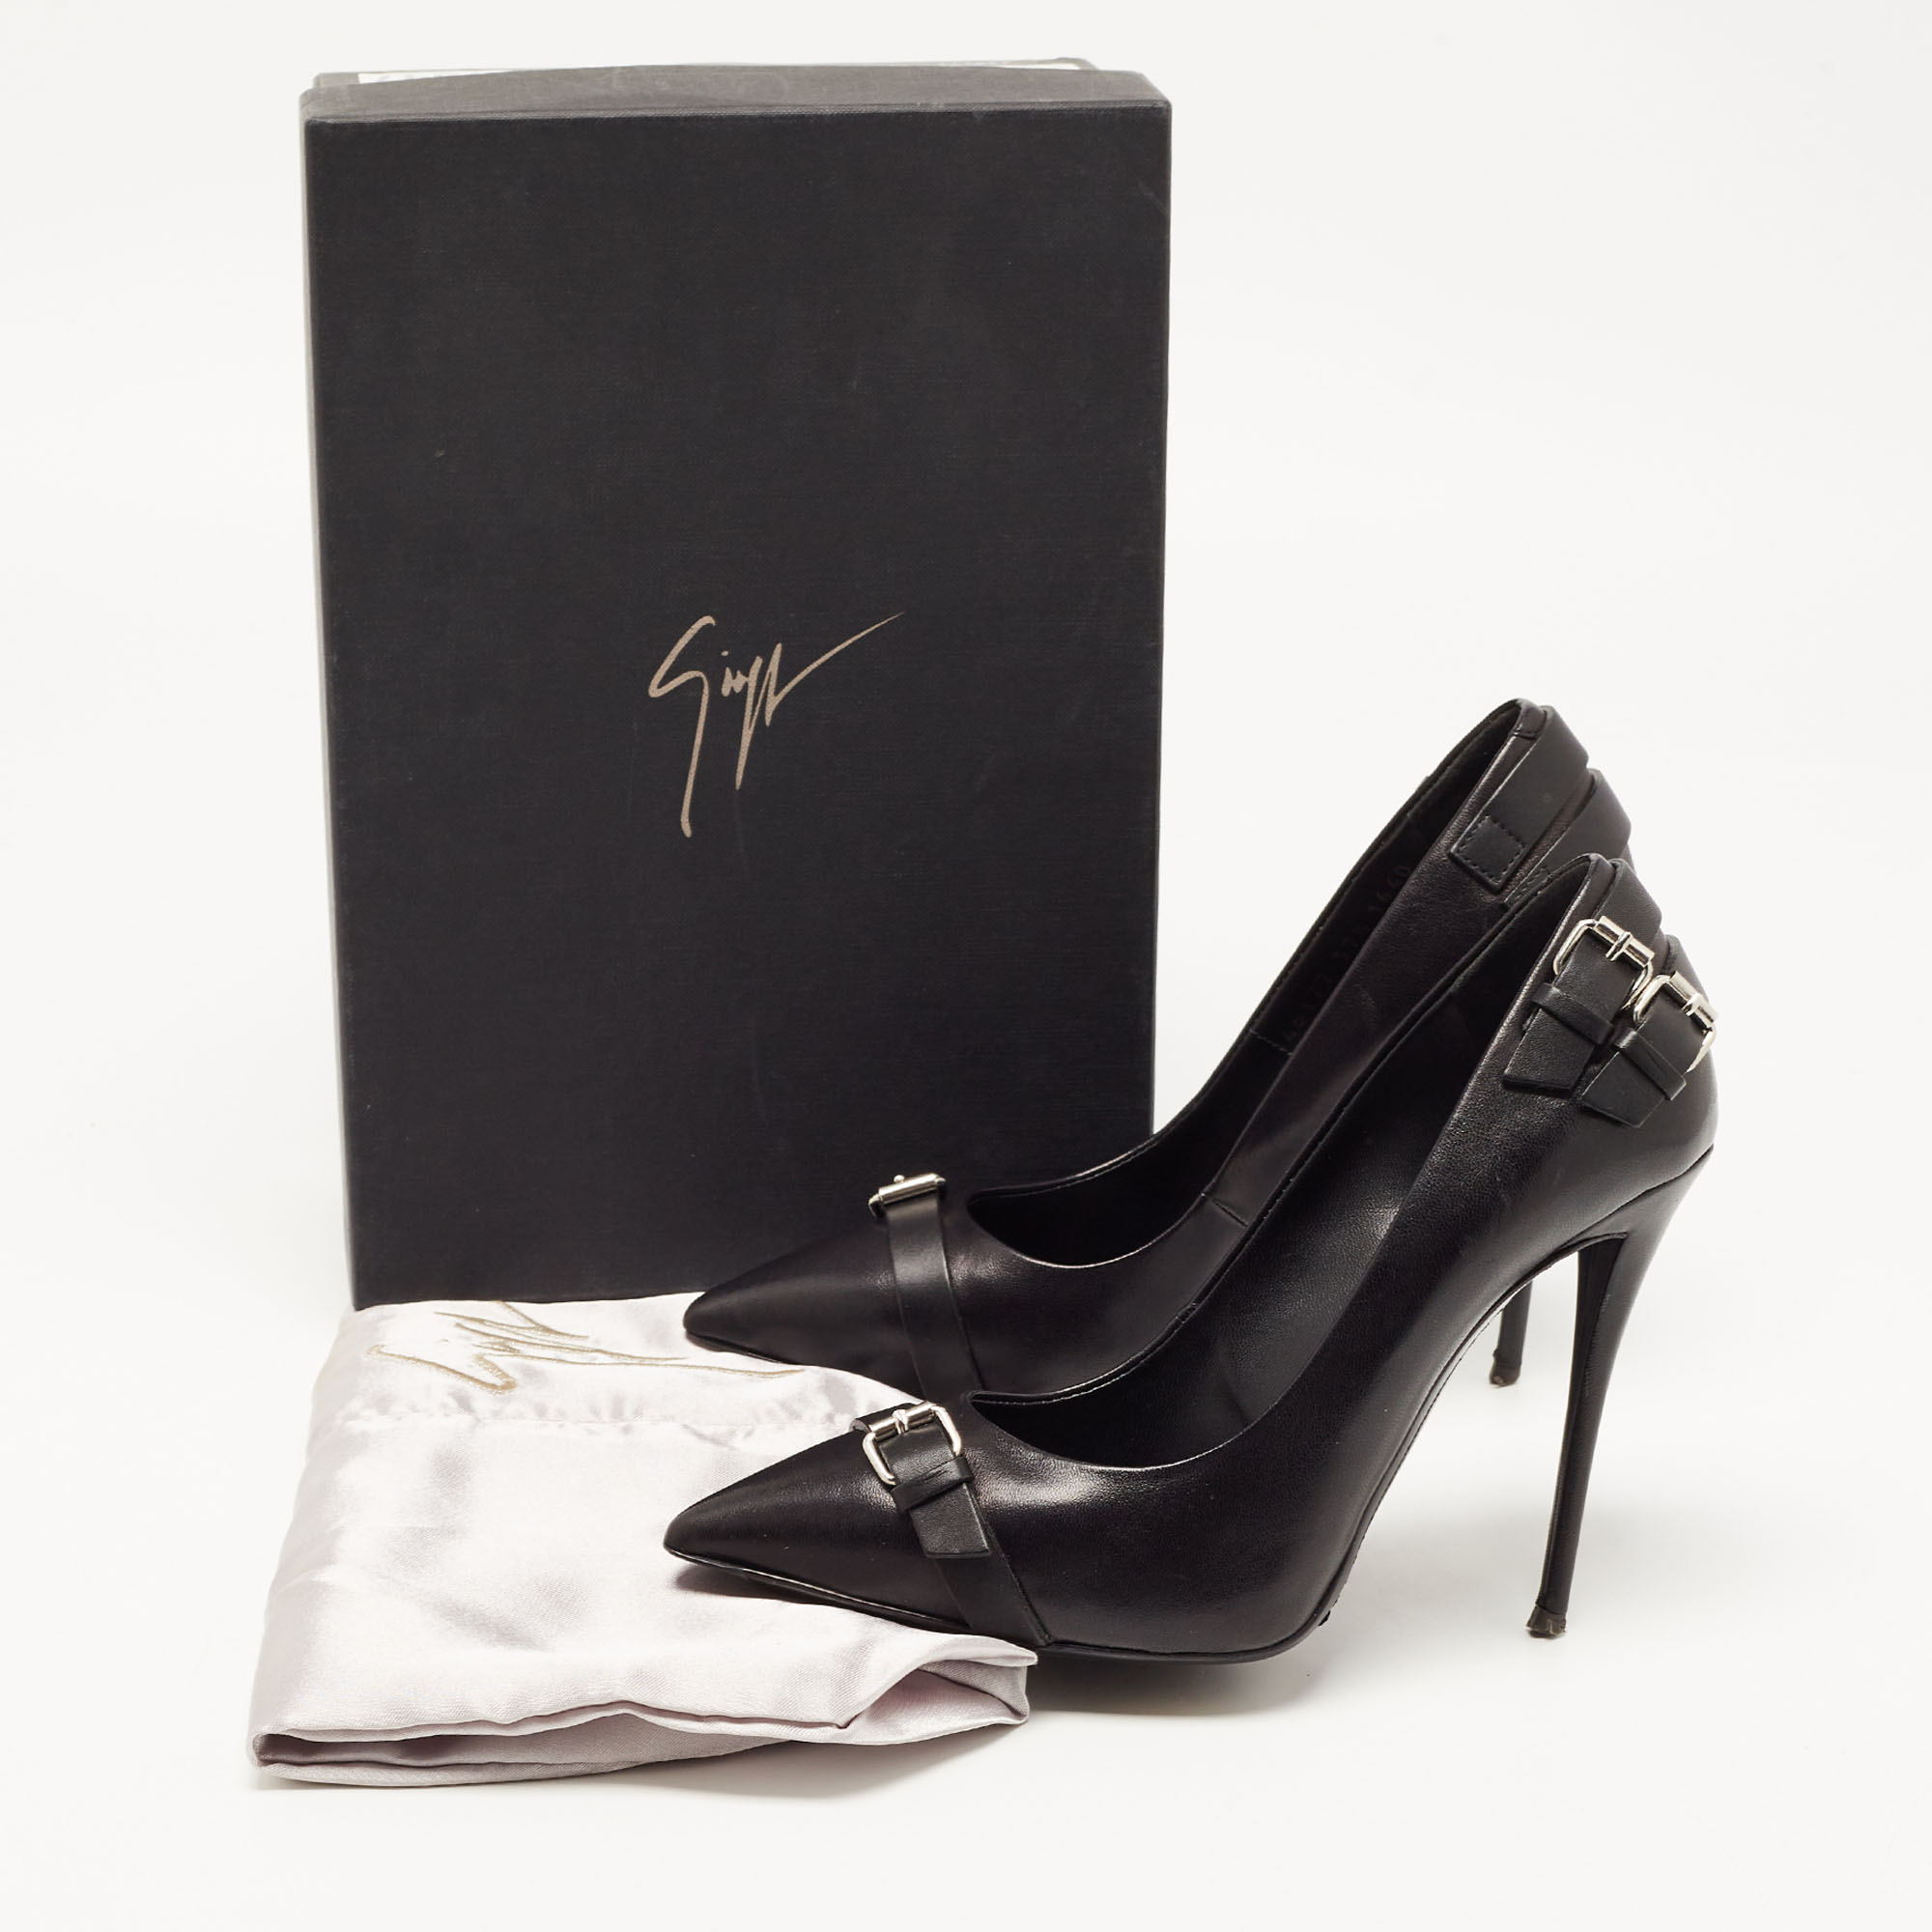 Giuseppe Zanotti Black Leather Buckle Detail Pointed Toe Pumps Size 37.5